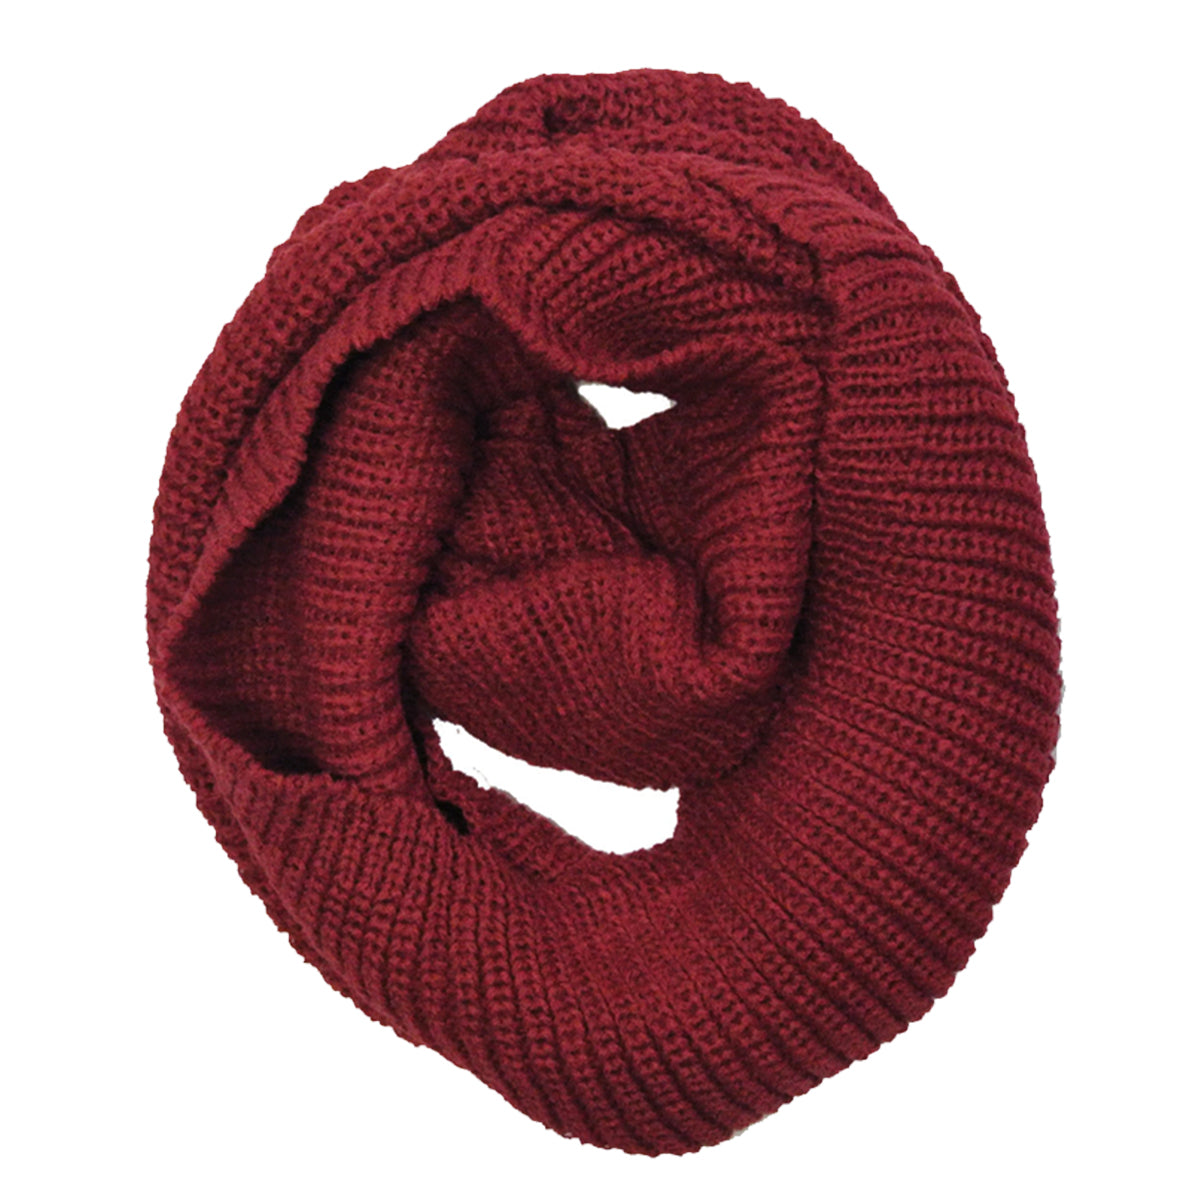 Mens Navy Blue and Burgundy Red Infinity Scarf and Hat Set